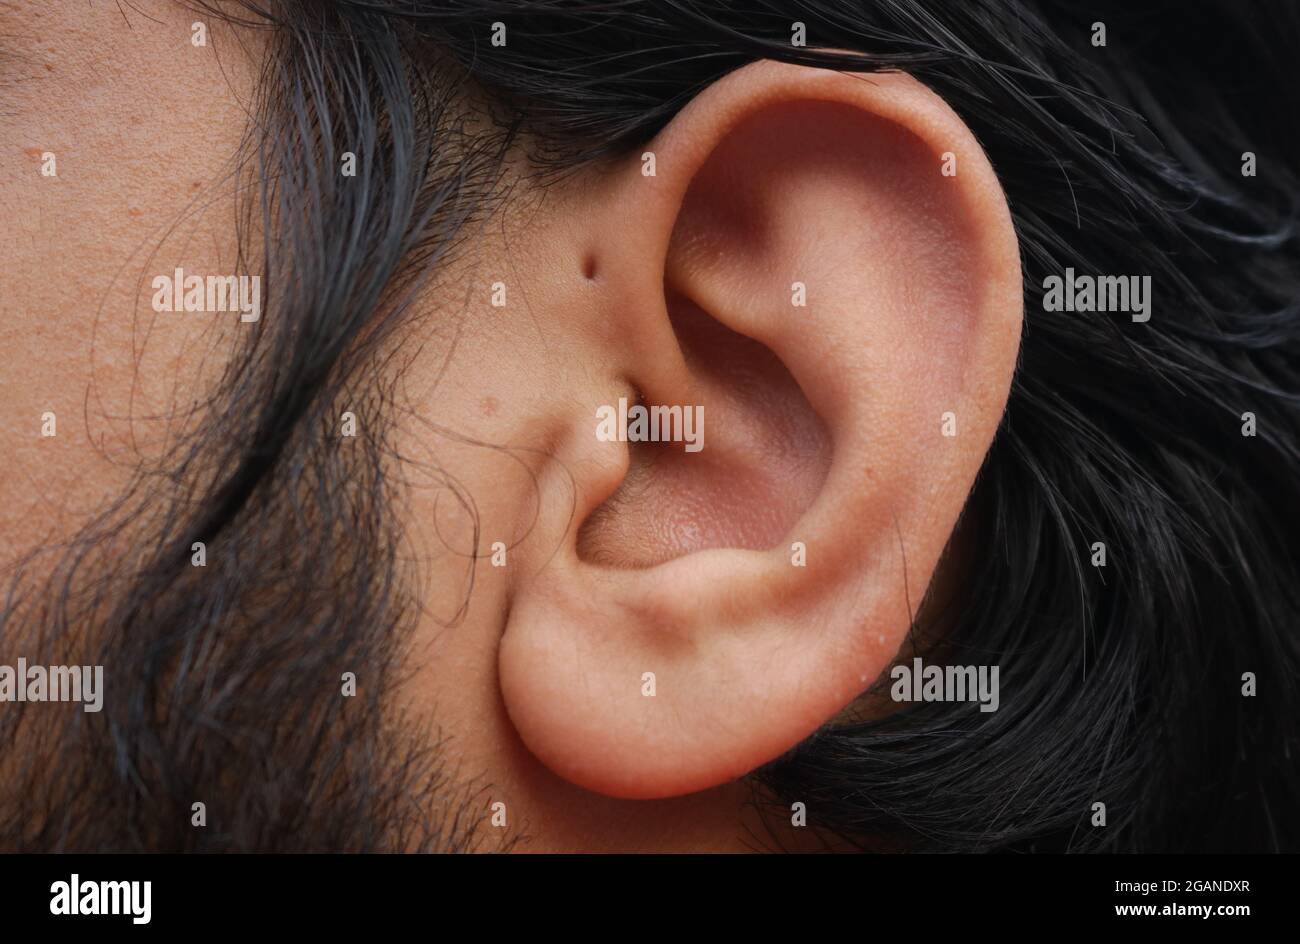 Small hole near the ear which is known as Preauricular Pit. Stock Photo